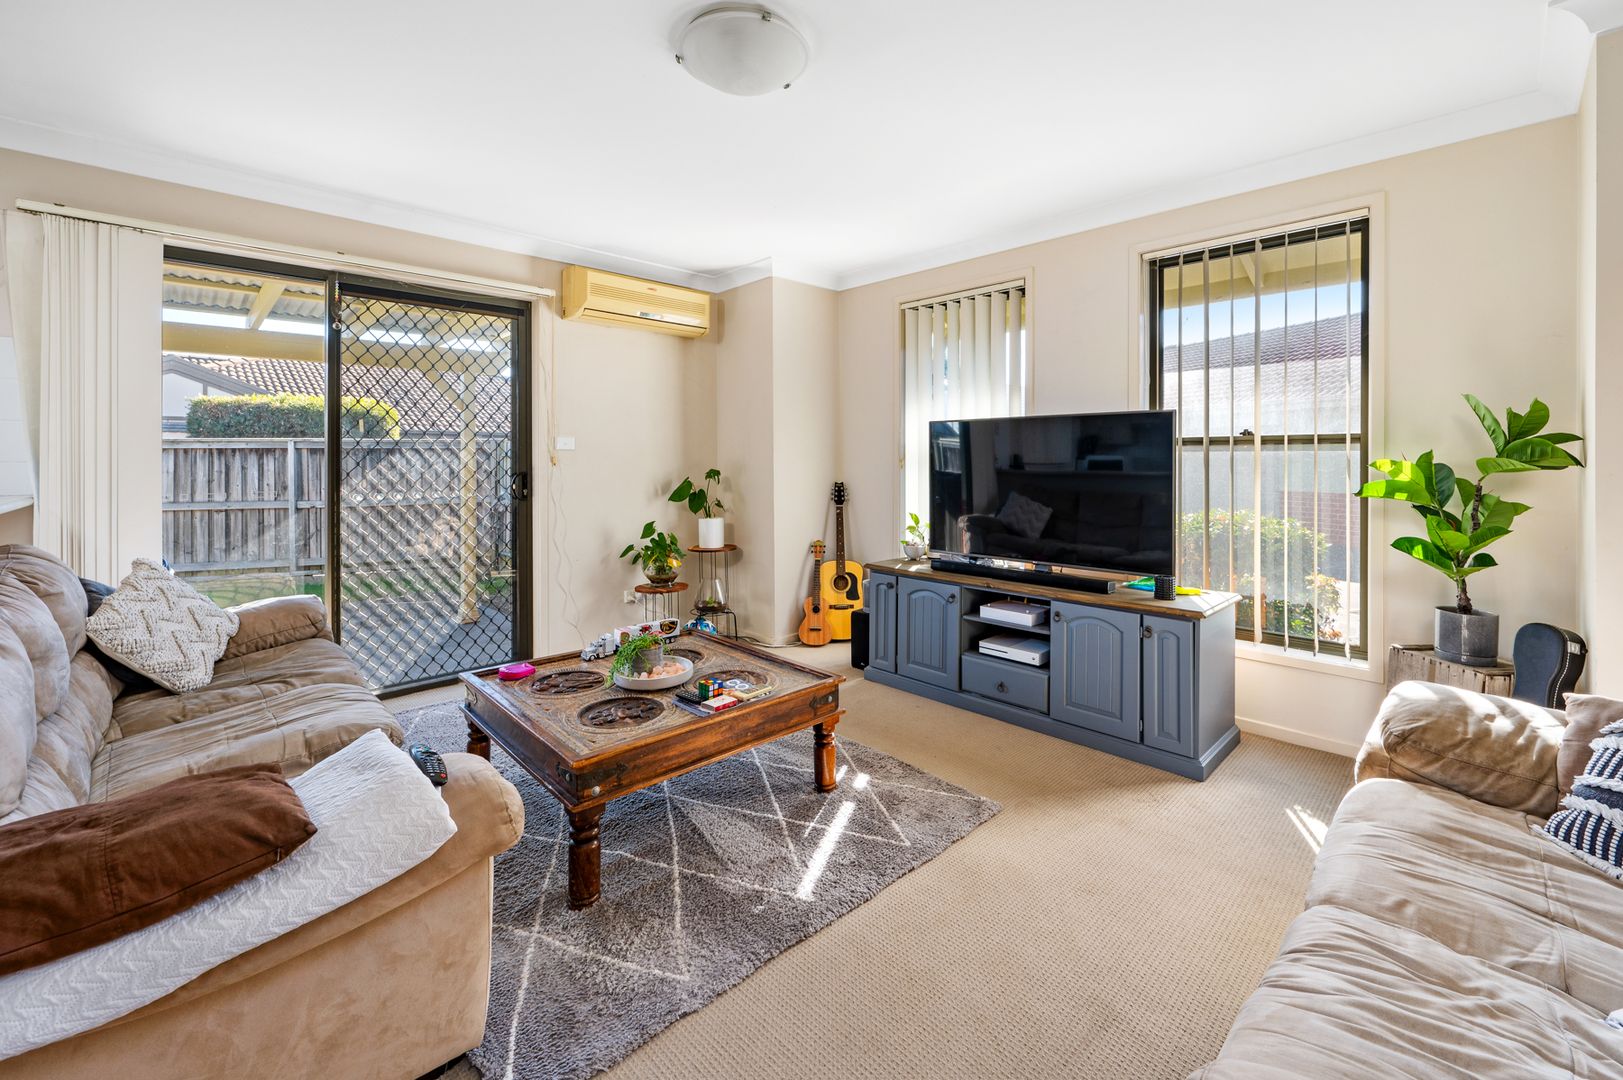 3/12 Denton Park Drive, Rutherford NSW 2320, Image 1